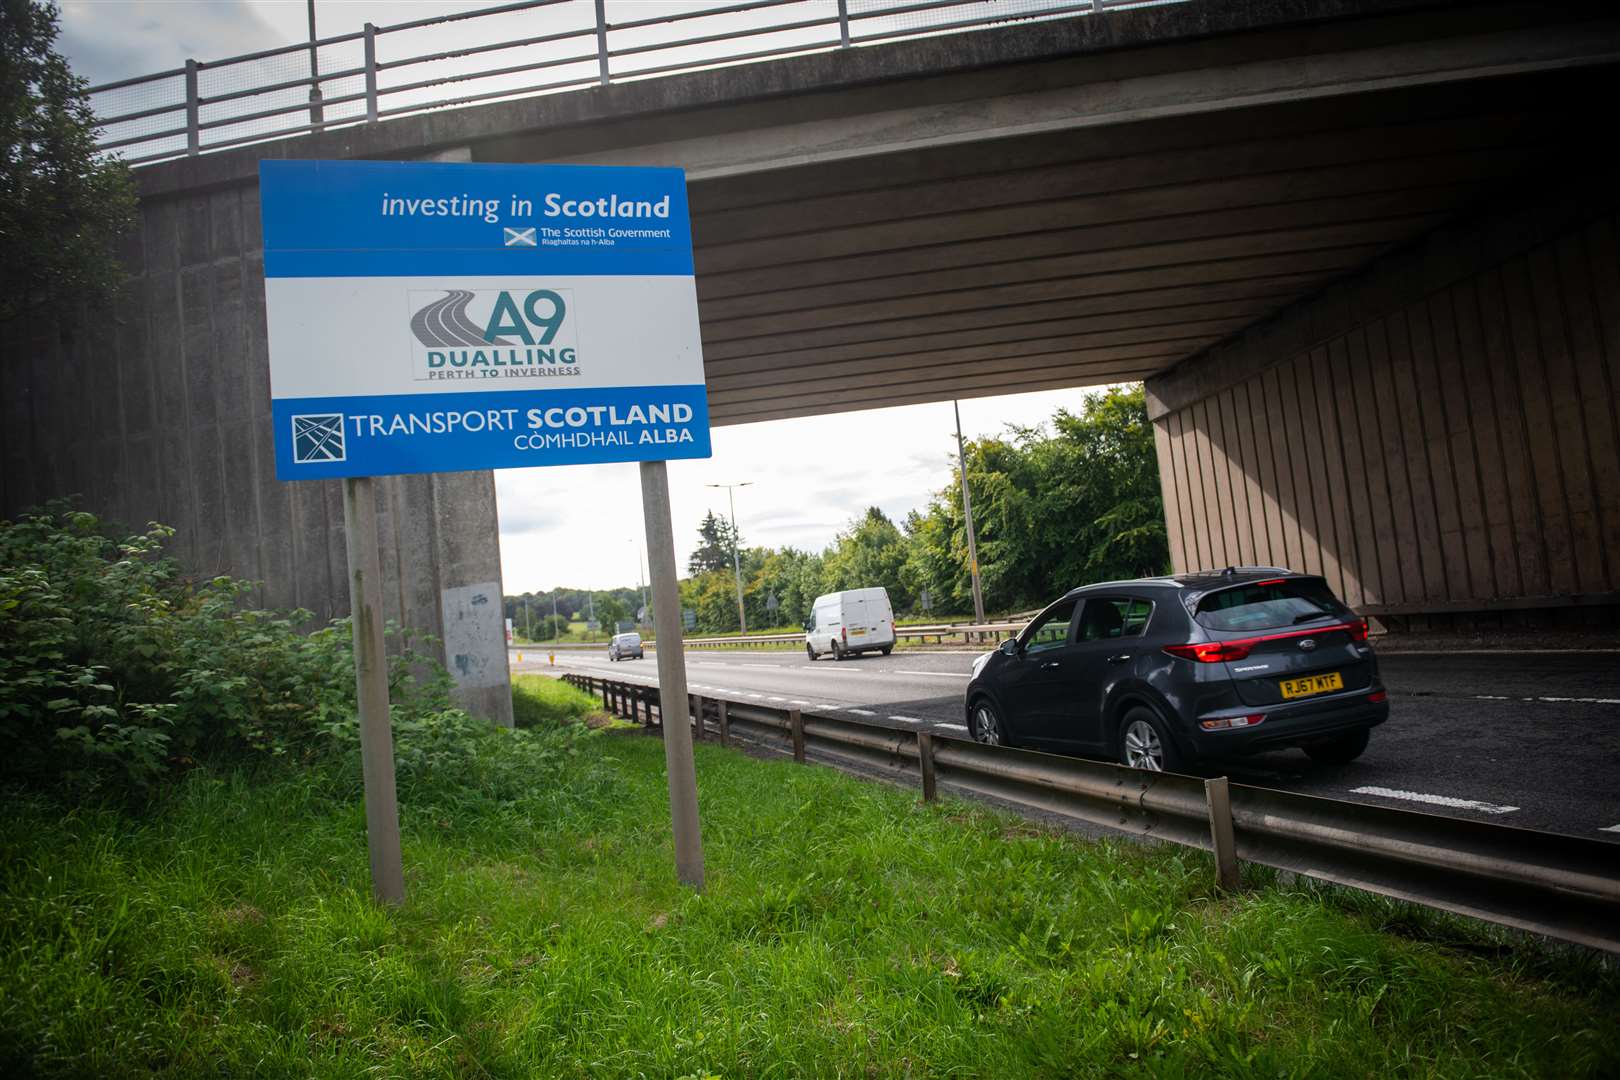 The Scottish Government are under pressure over the A9 dualling programme.